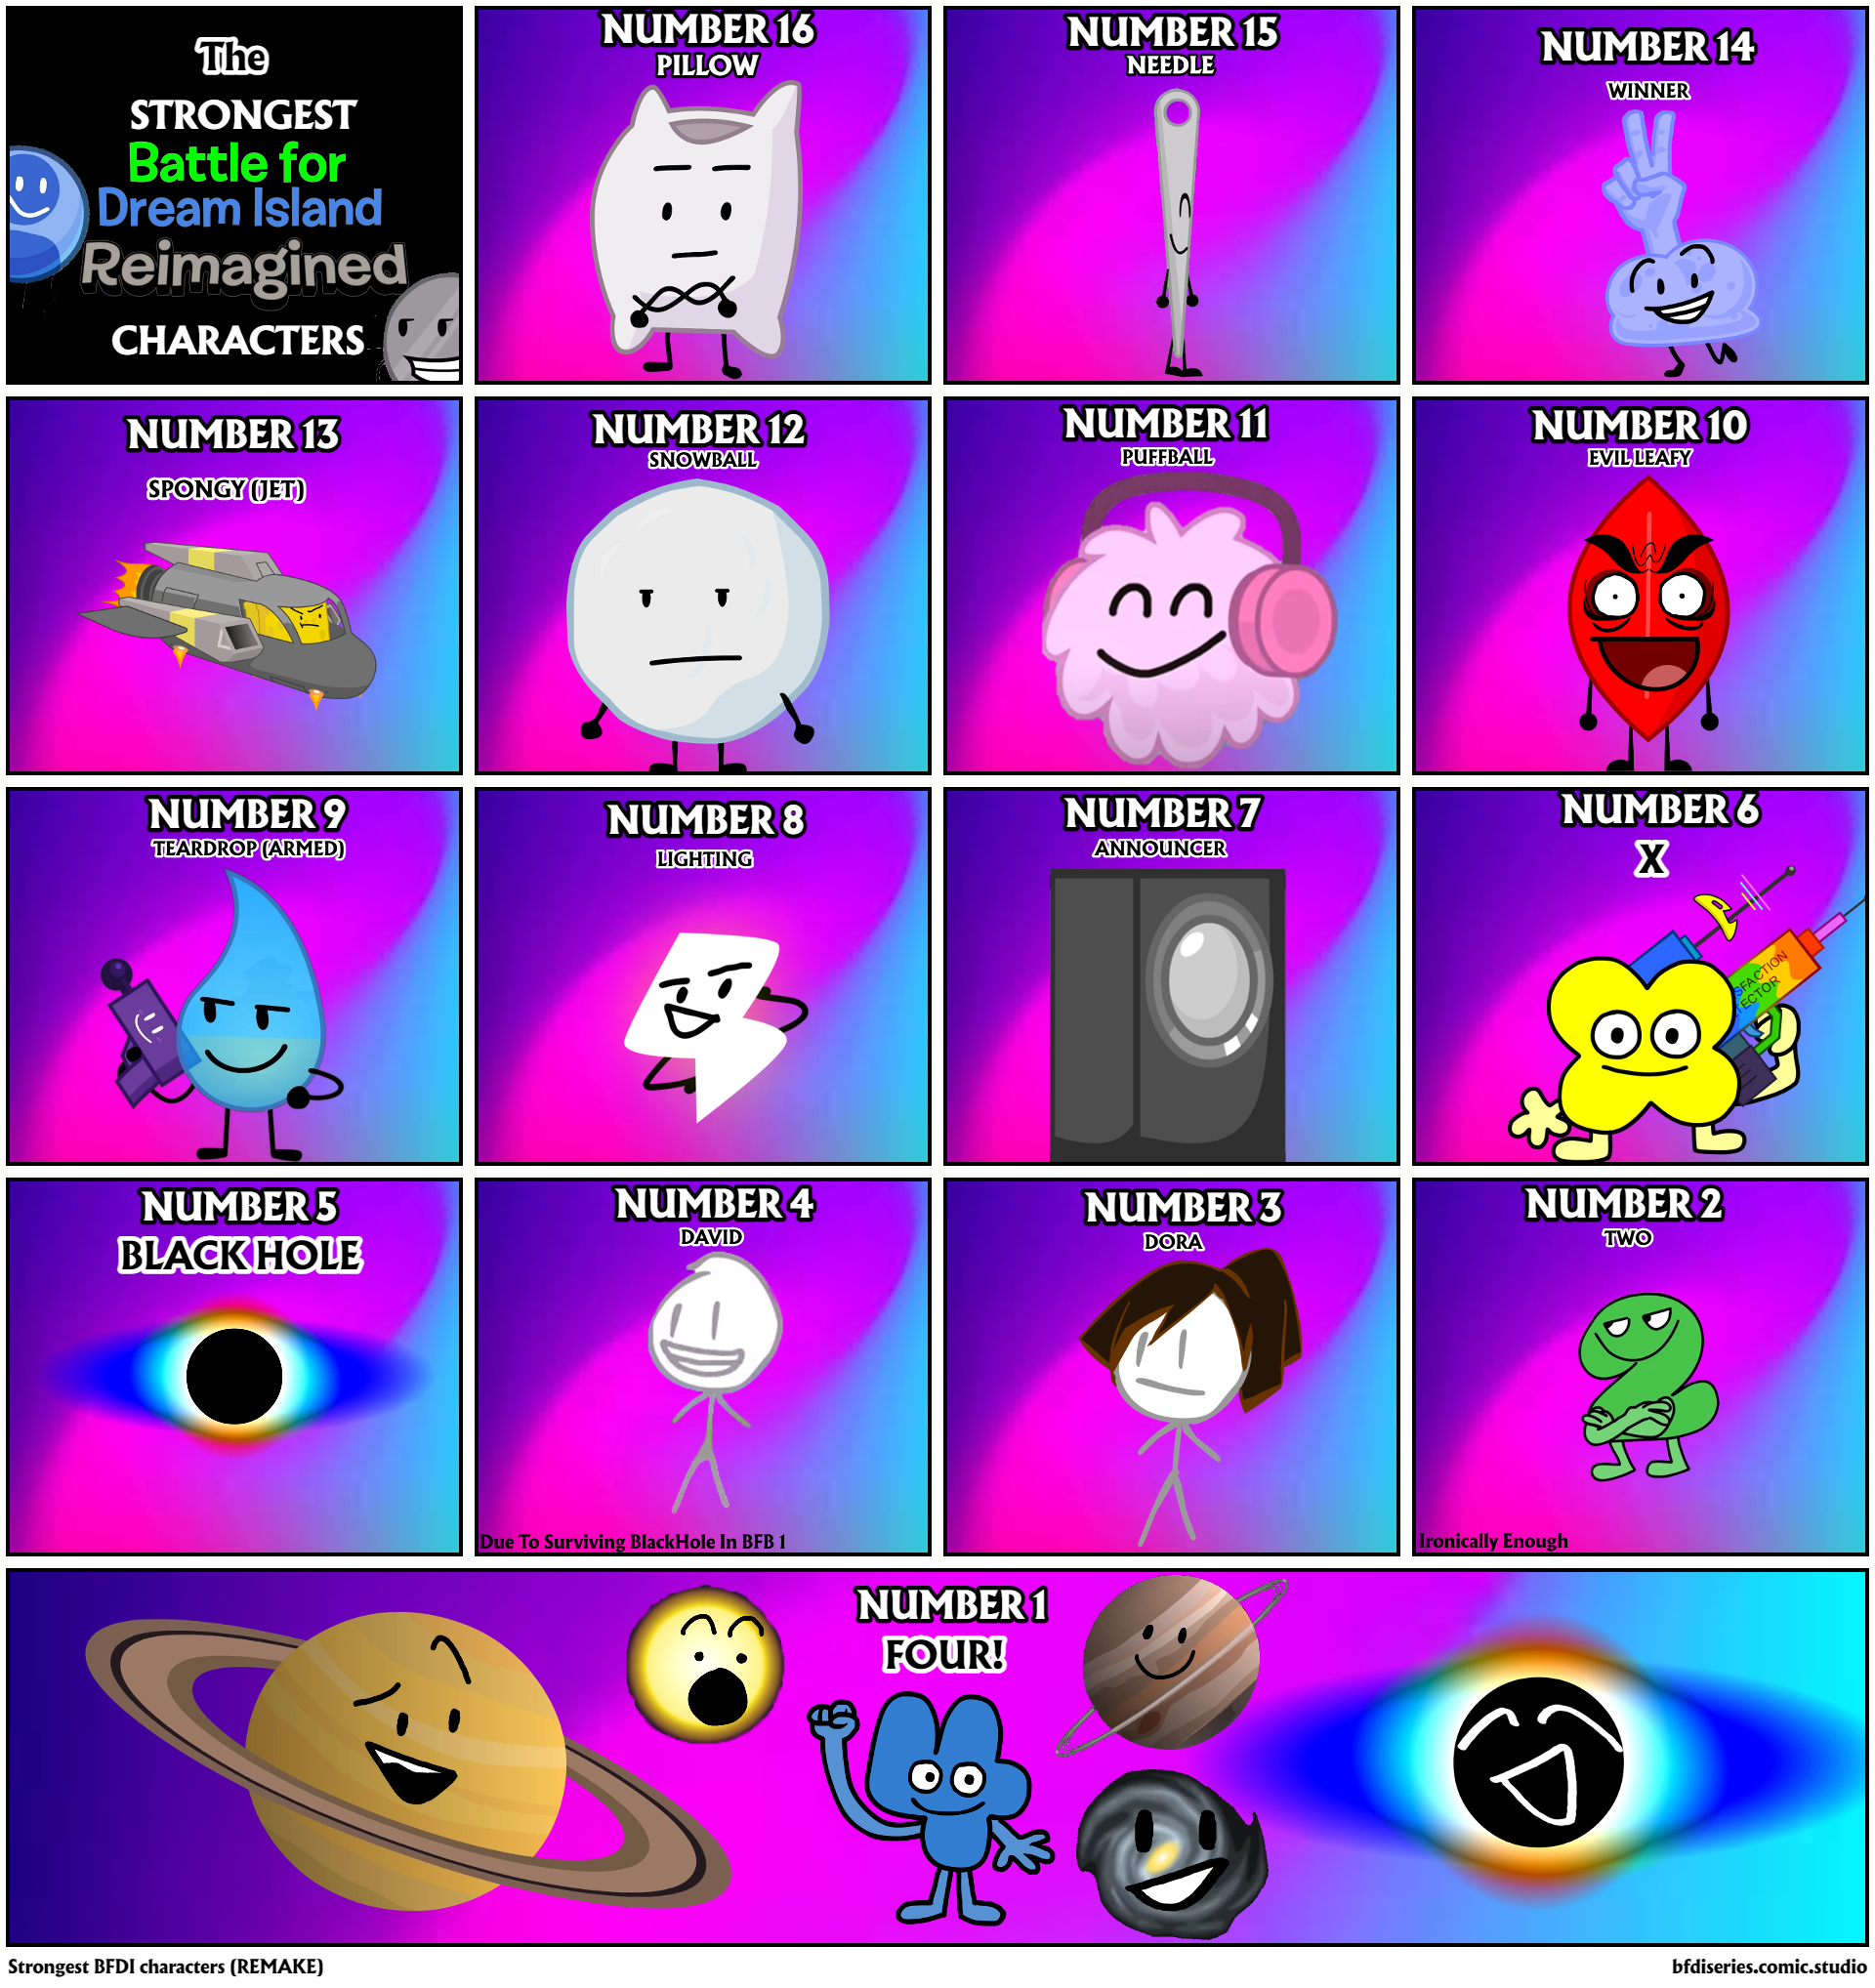 Strongest BFDI characters (REMAKE)